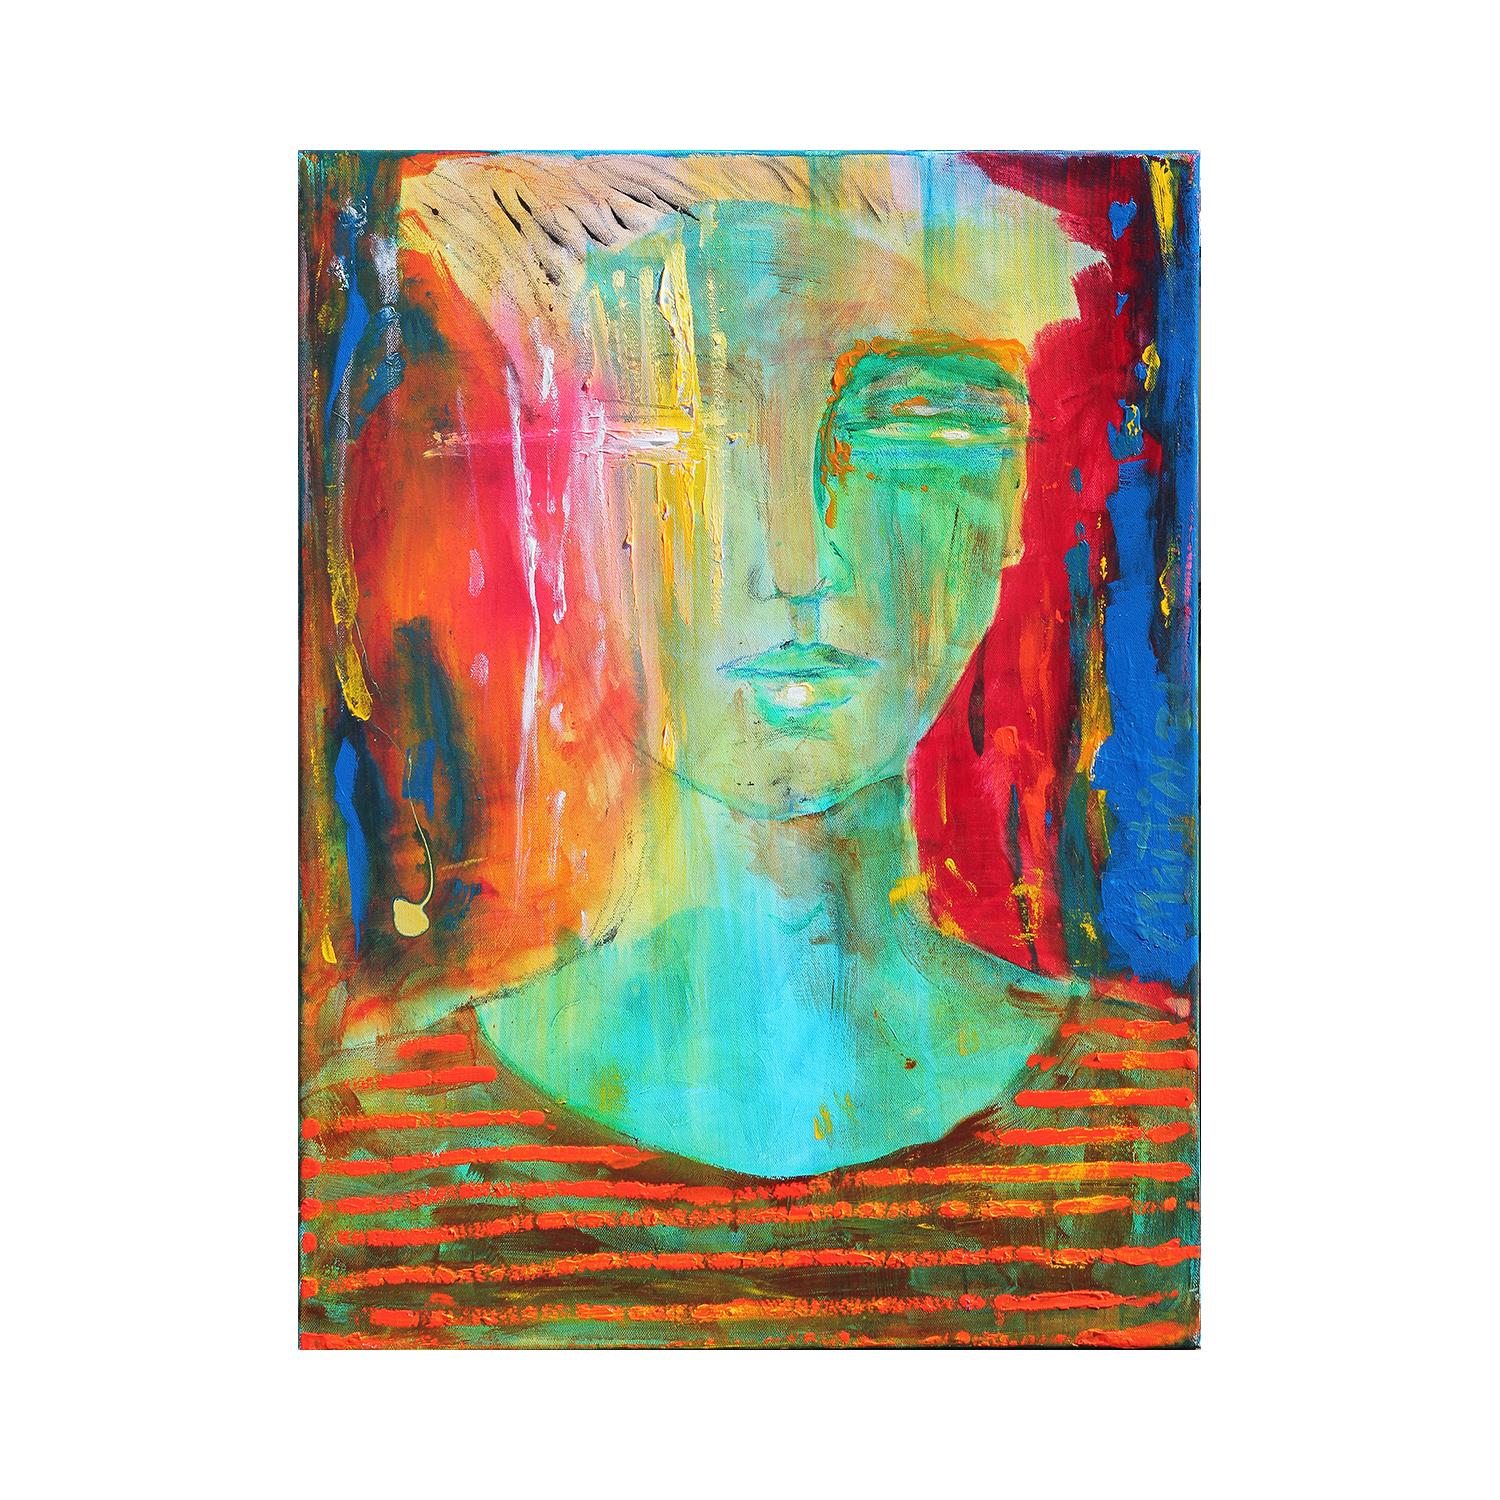 Colorful Contemporary Abstract Green, Red, Yellow & Blue Portrait of a Figure  - Painting by Larry Martin